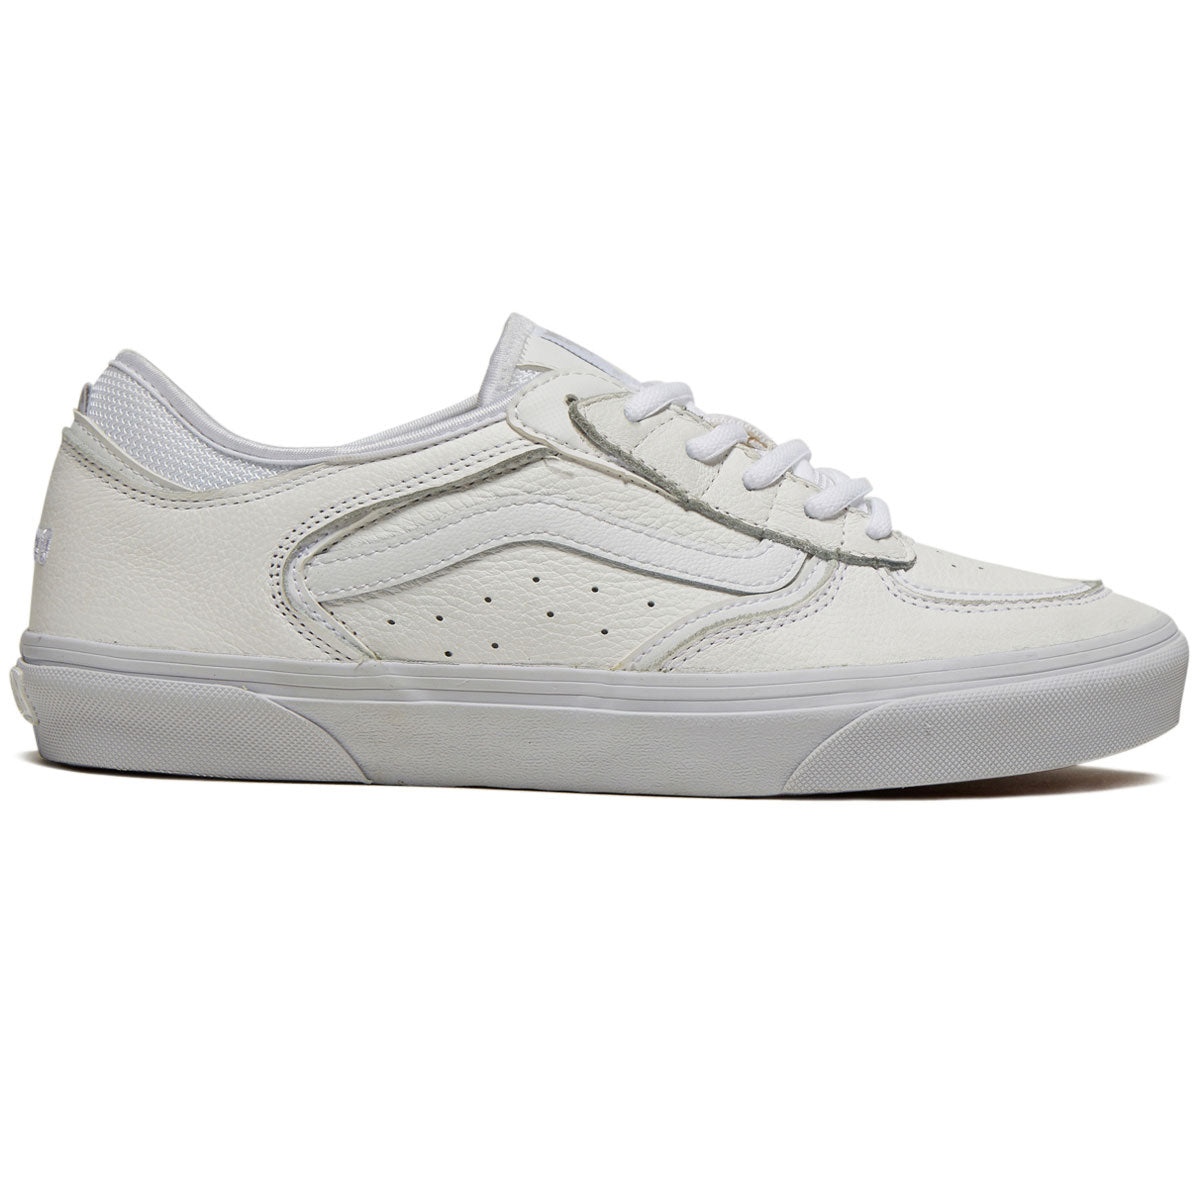 Vans Skate Rowley Shoes - Leather White/White image 1